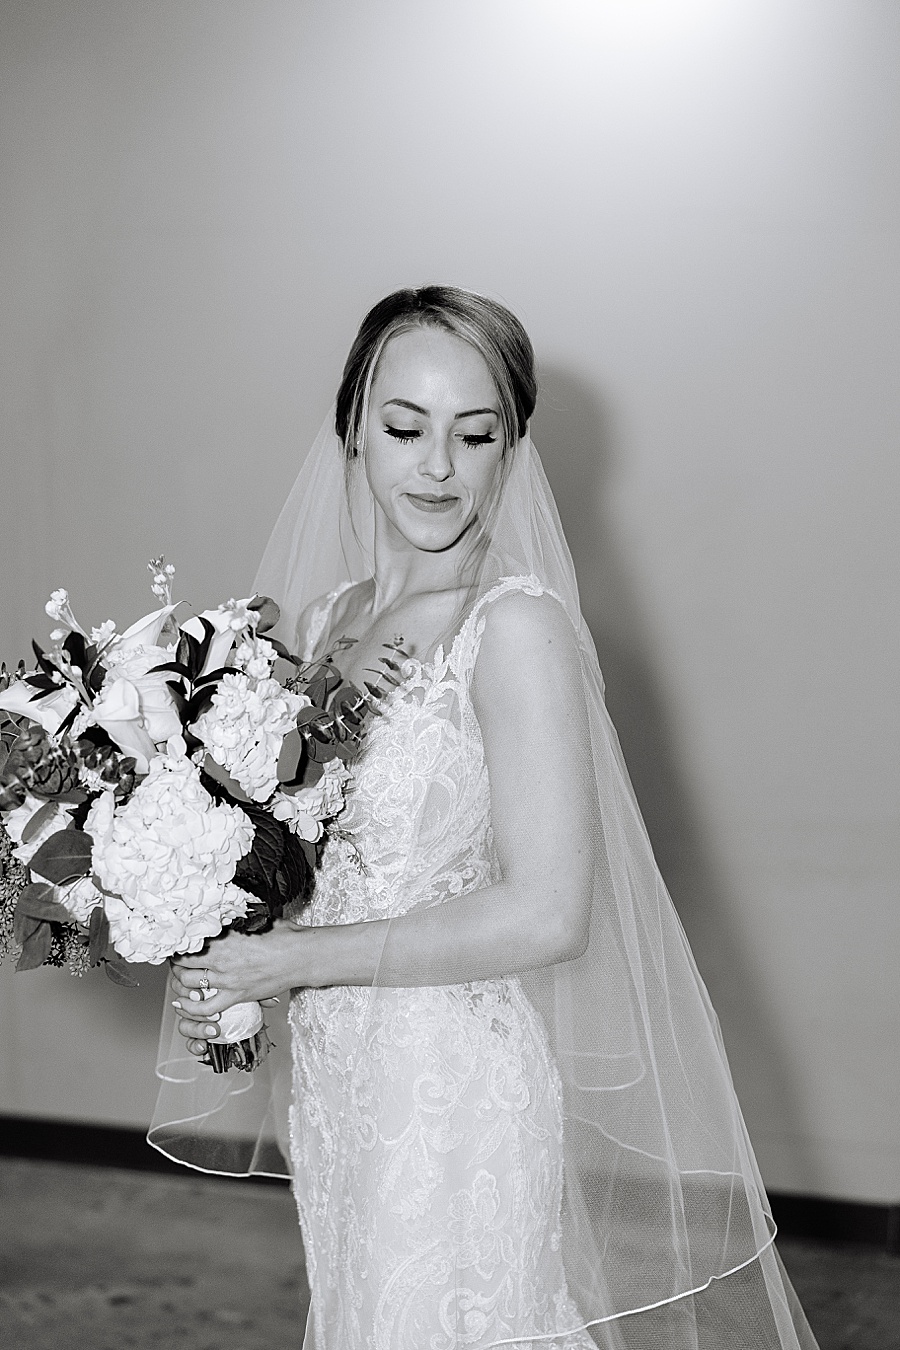 Bride with lace dress and veil and bouquet getting ready at Jackson Terminal in Knoxville TN by Mandy Hart Photo, Knoxville TN Wedding Photographer